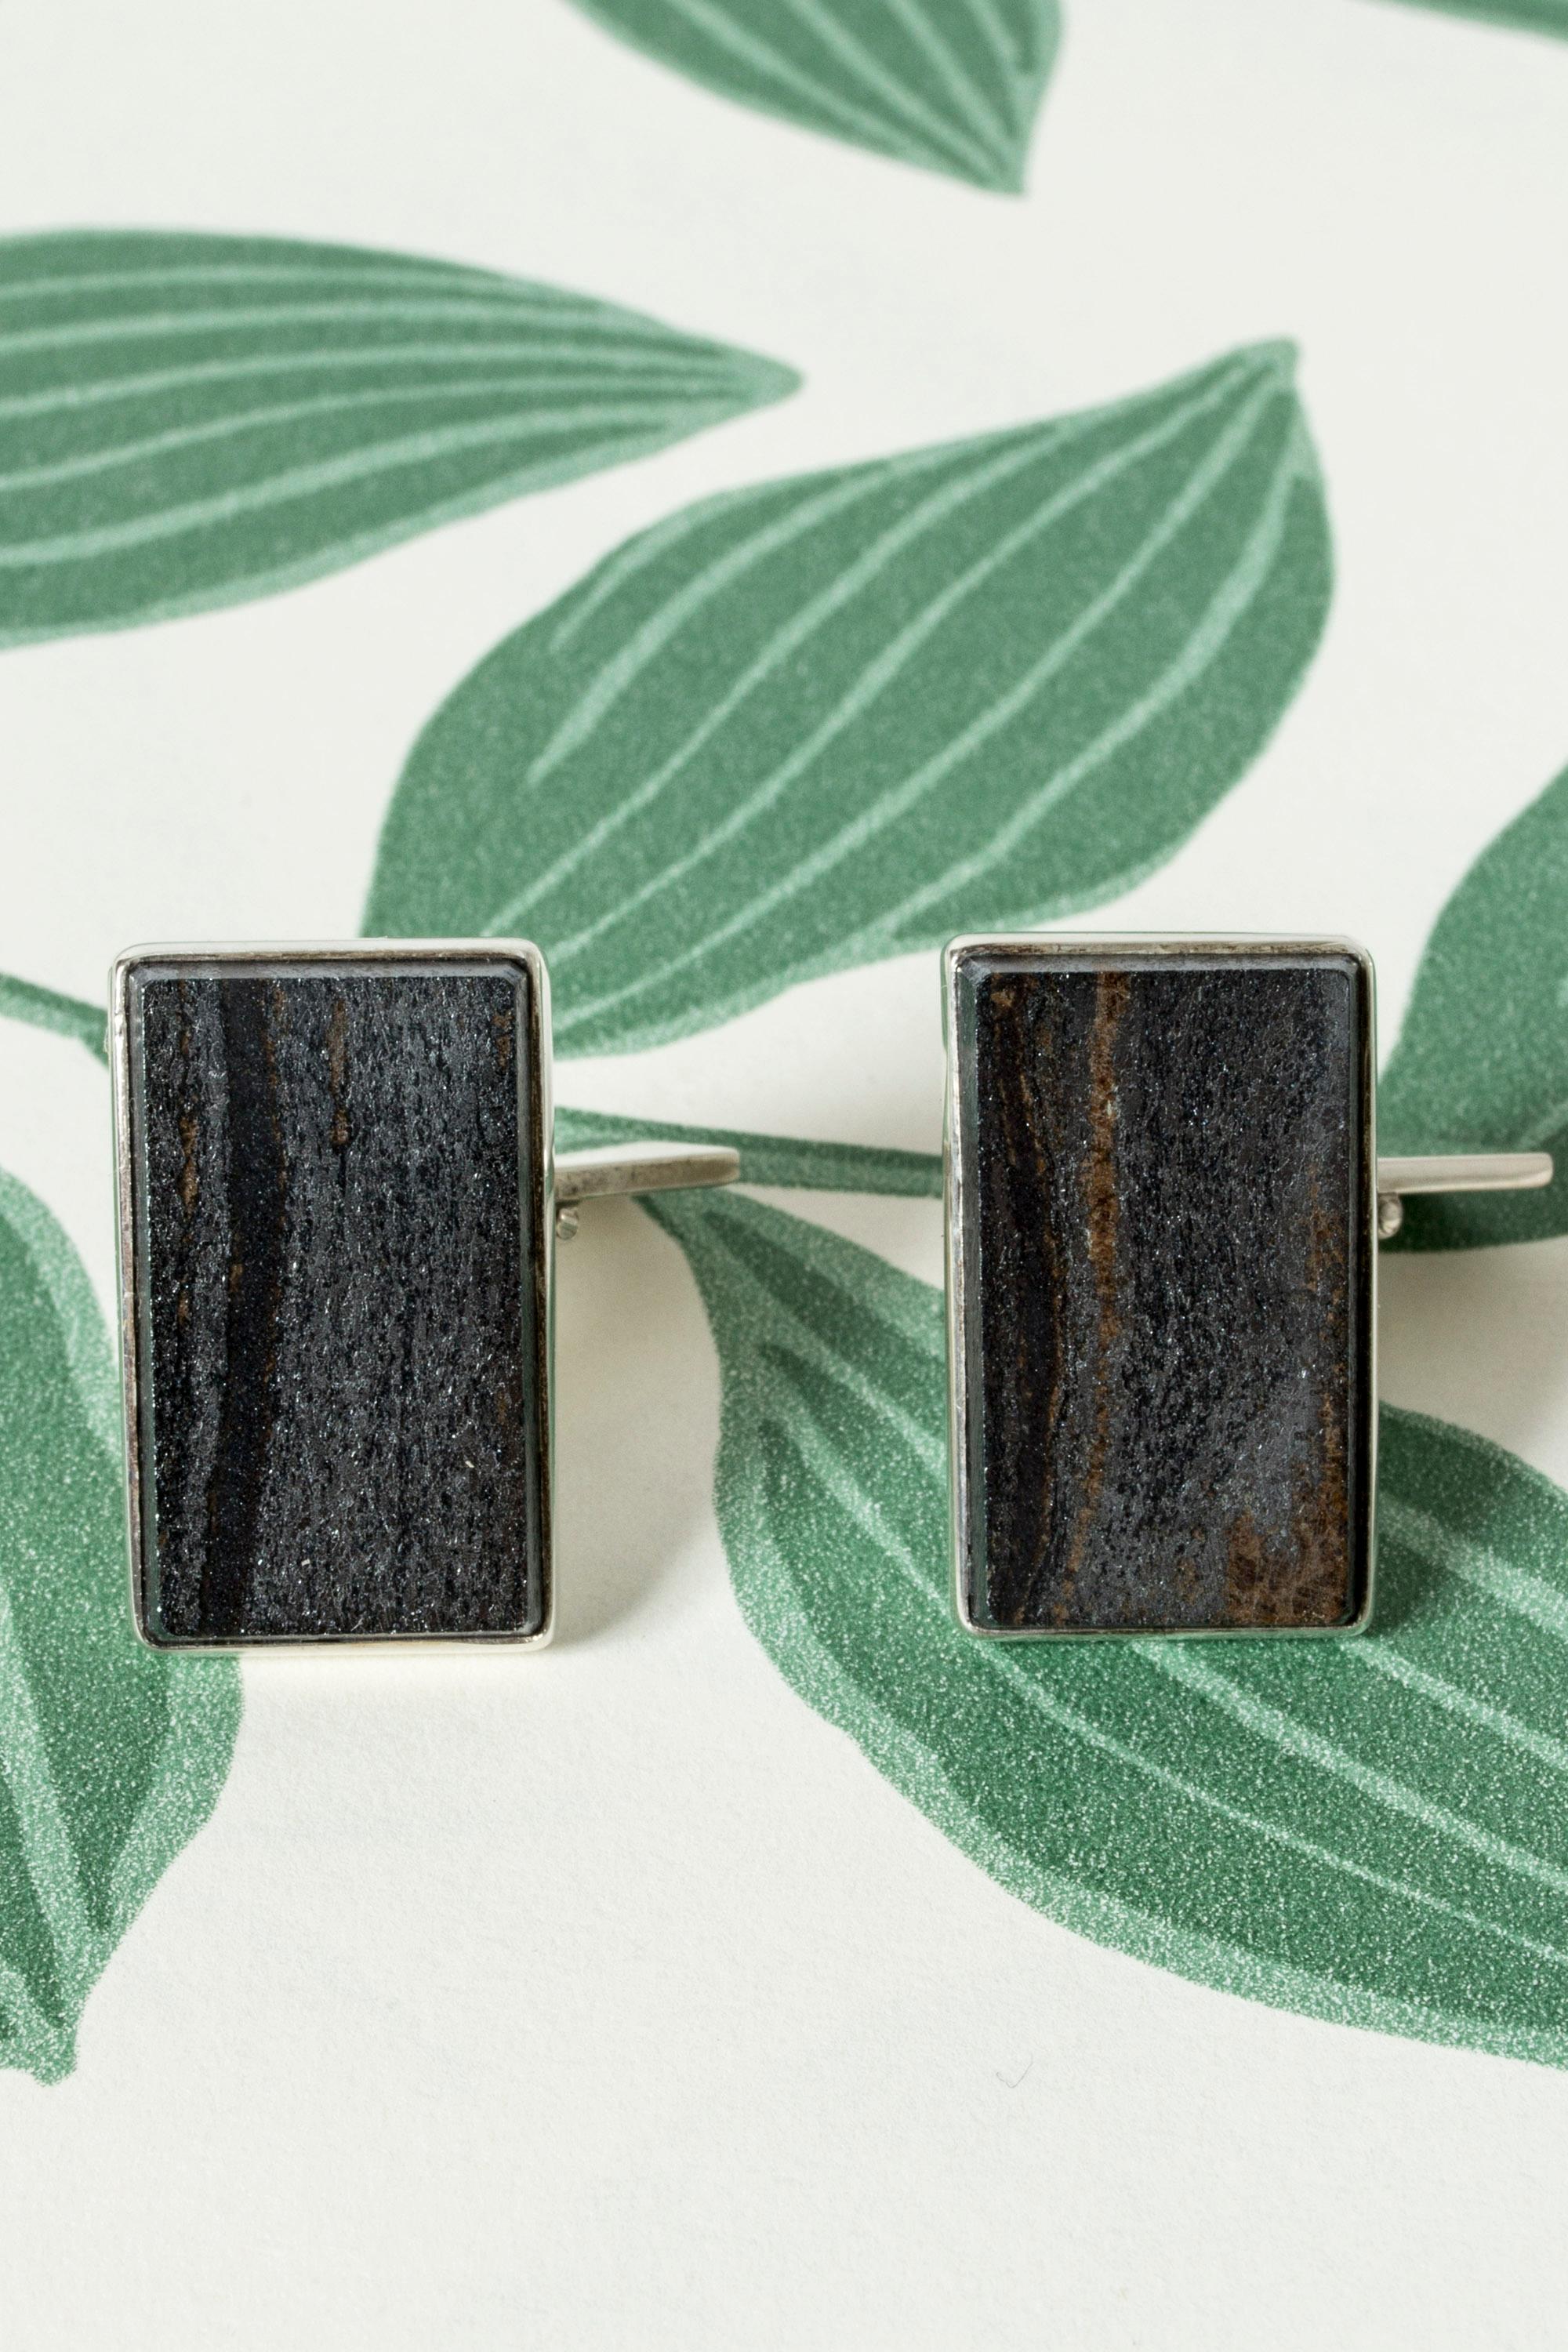 Cool silver cufflinks by Sten Morssing, in an oversized design with large hematite stones. Nice sheen and variation of color in the stones.